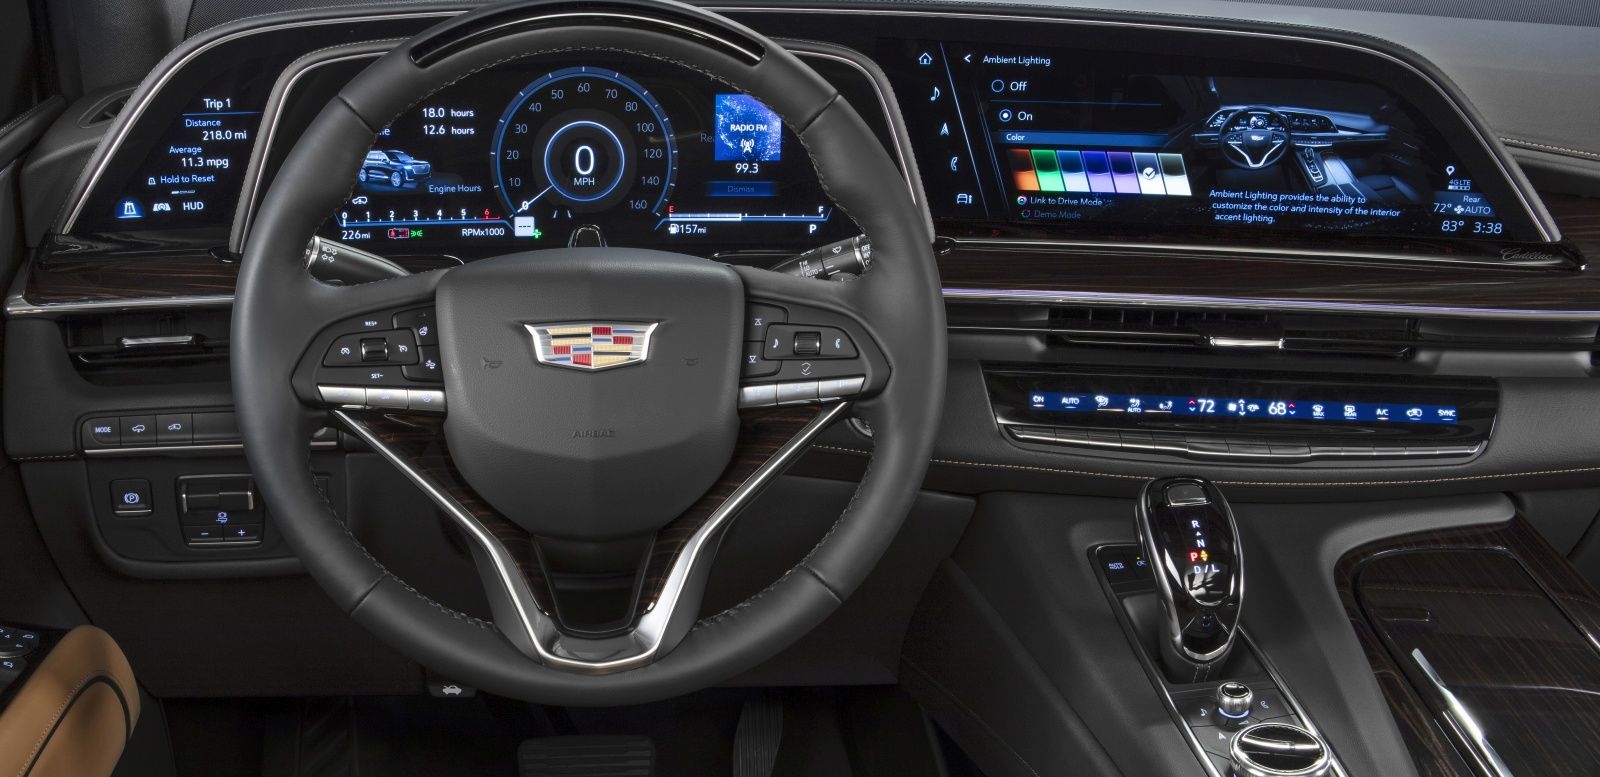 2021 Cadillac Escalade packs 38-inches of curved OLED screens and Super Cruise | DeviceDaily.com